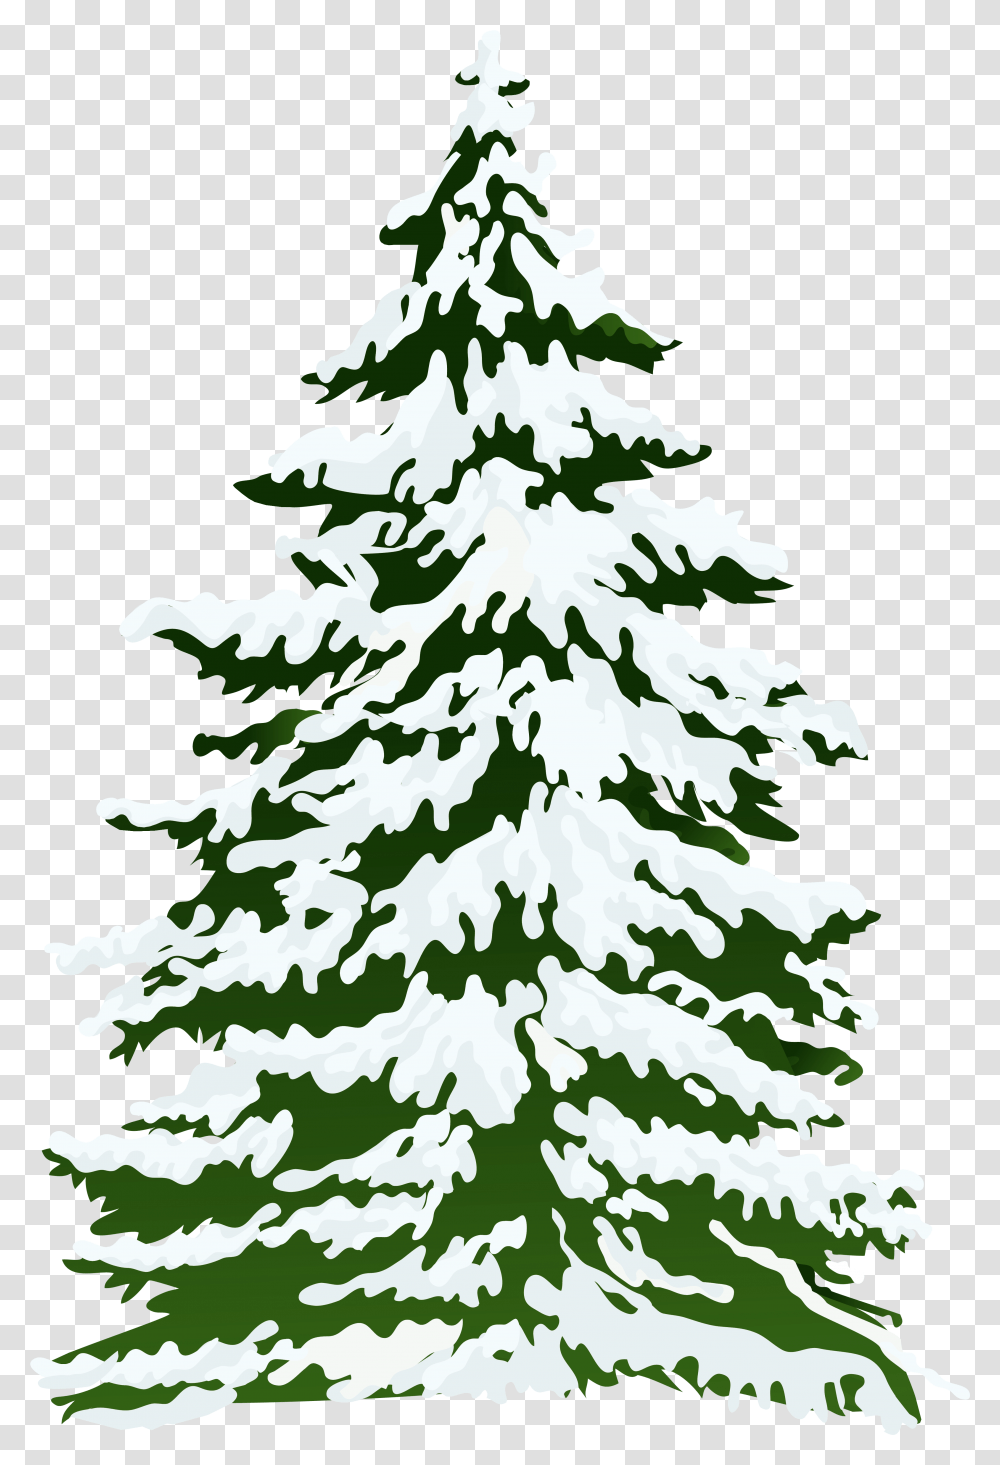 Download Free Pine Tree Freeuse Stock Outline Rr Snowy Pine Tree Watercolor, Plant, Ornament, Christmas Tree, Fir Transparent Png